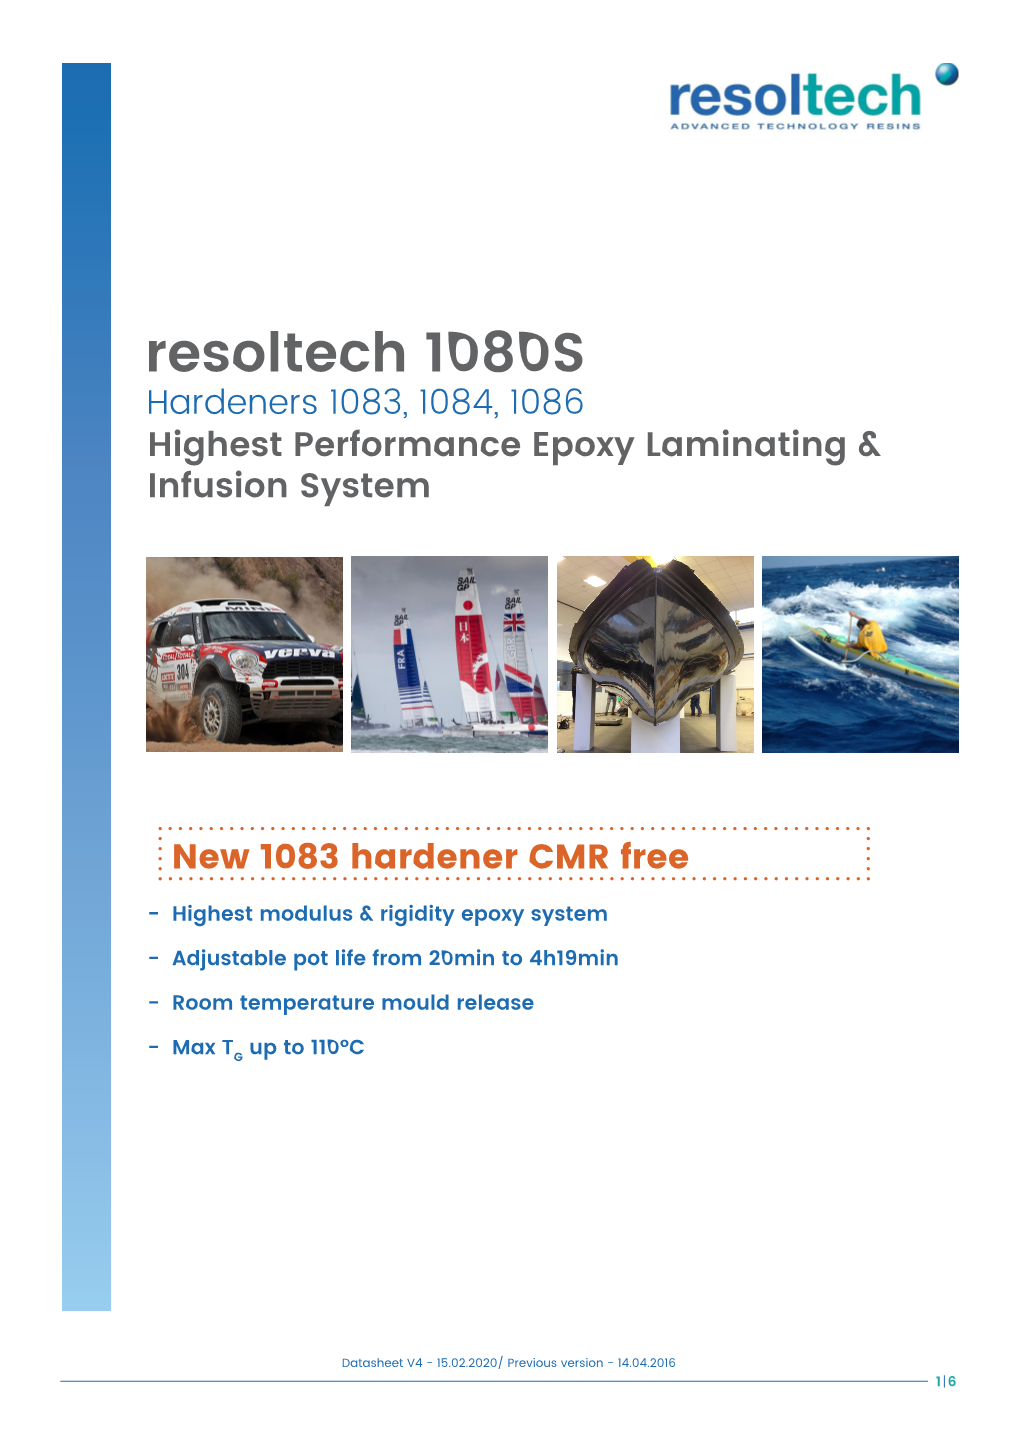 Resoltech 1080S Hardeners 1083, 1084, 1086 Highest Performance Epoxy Laminating & Infusion System